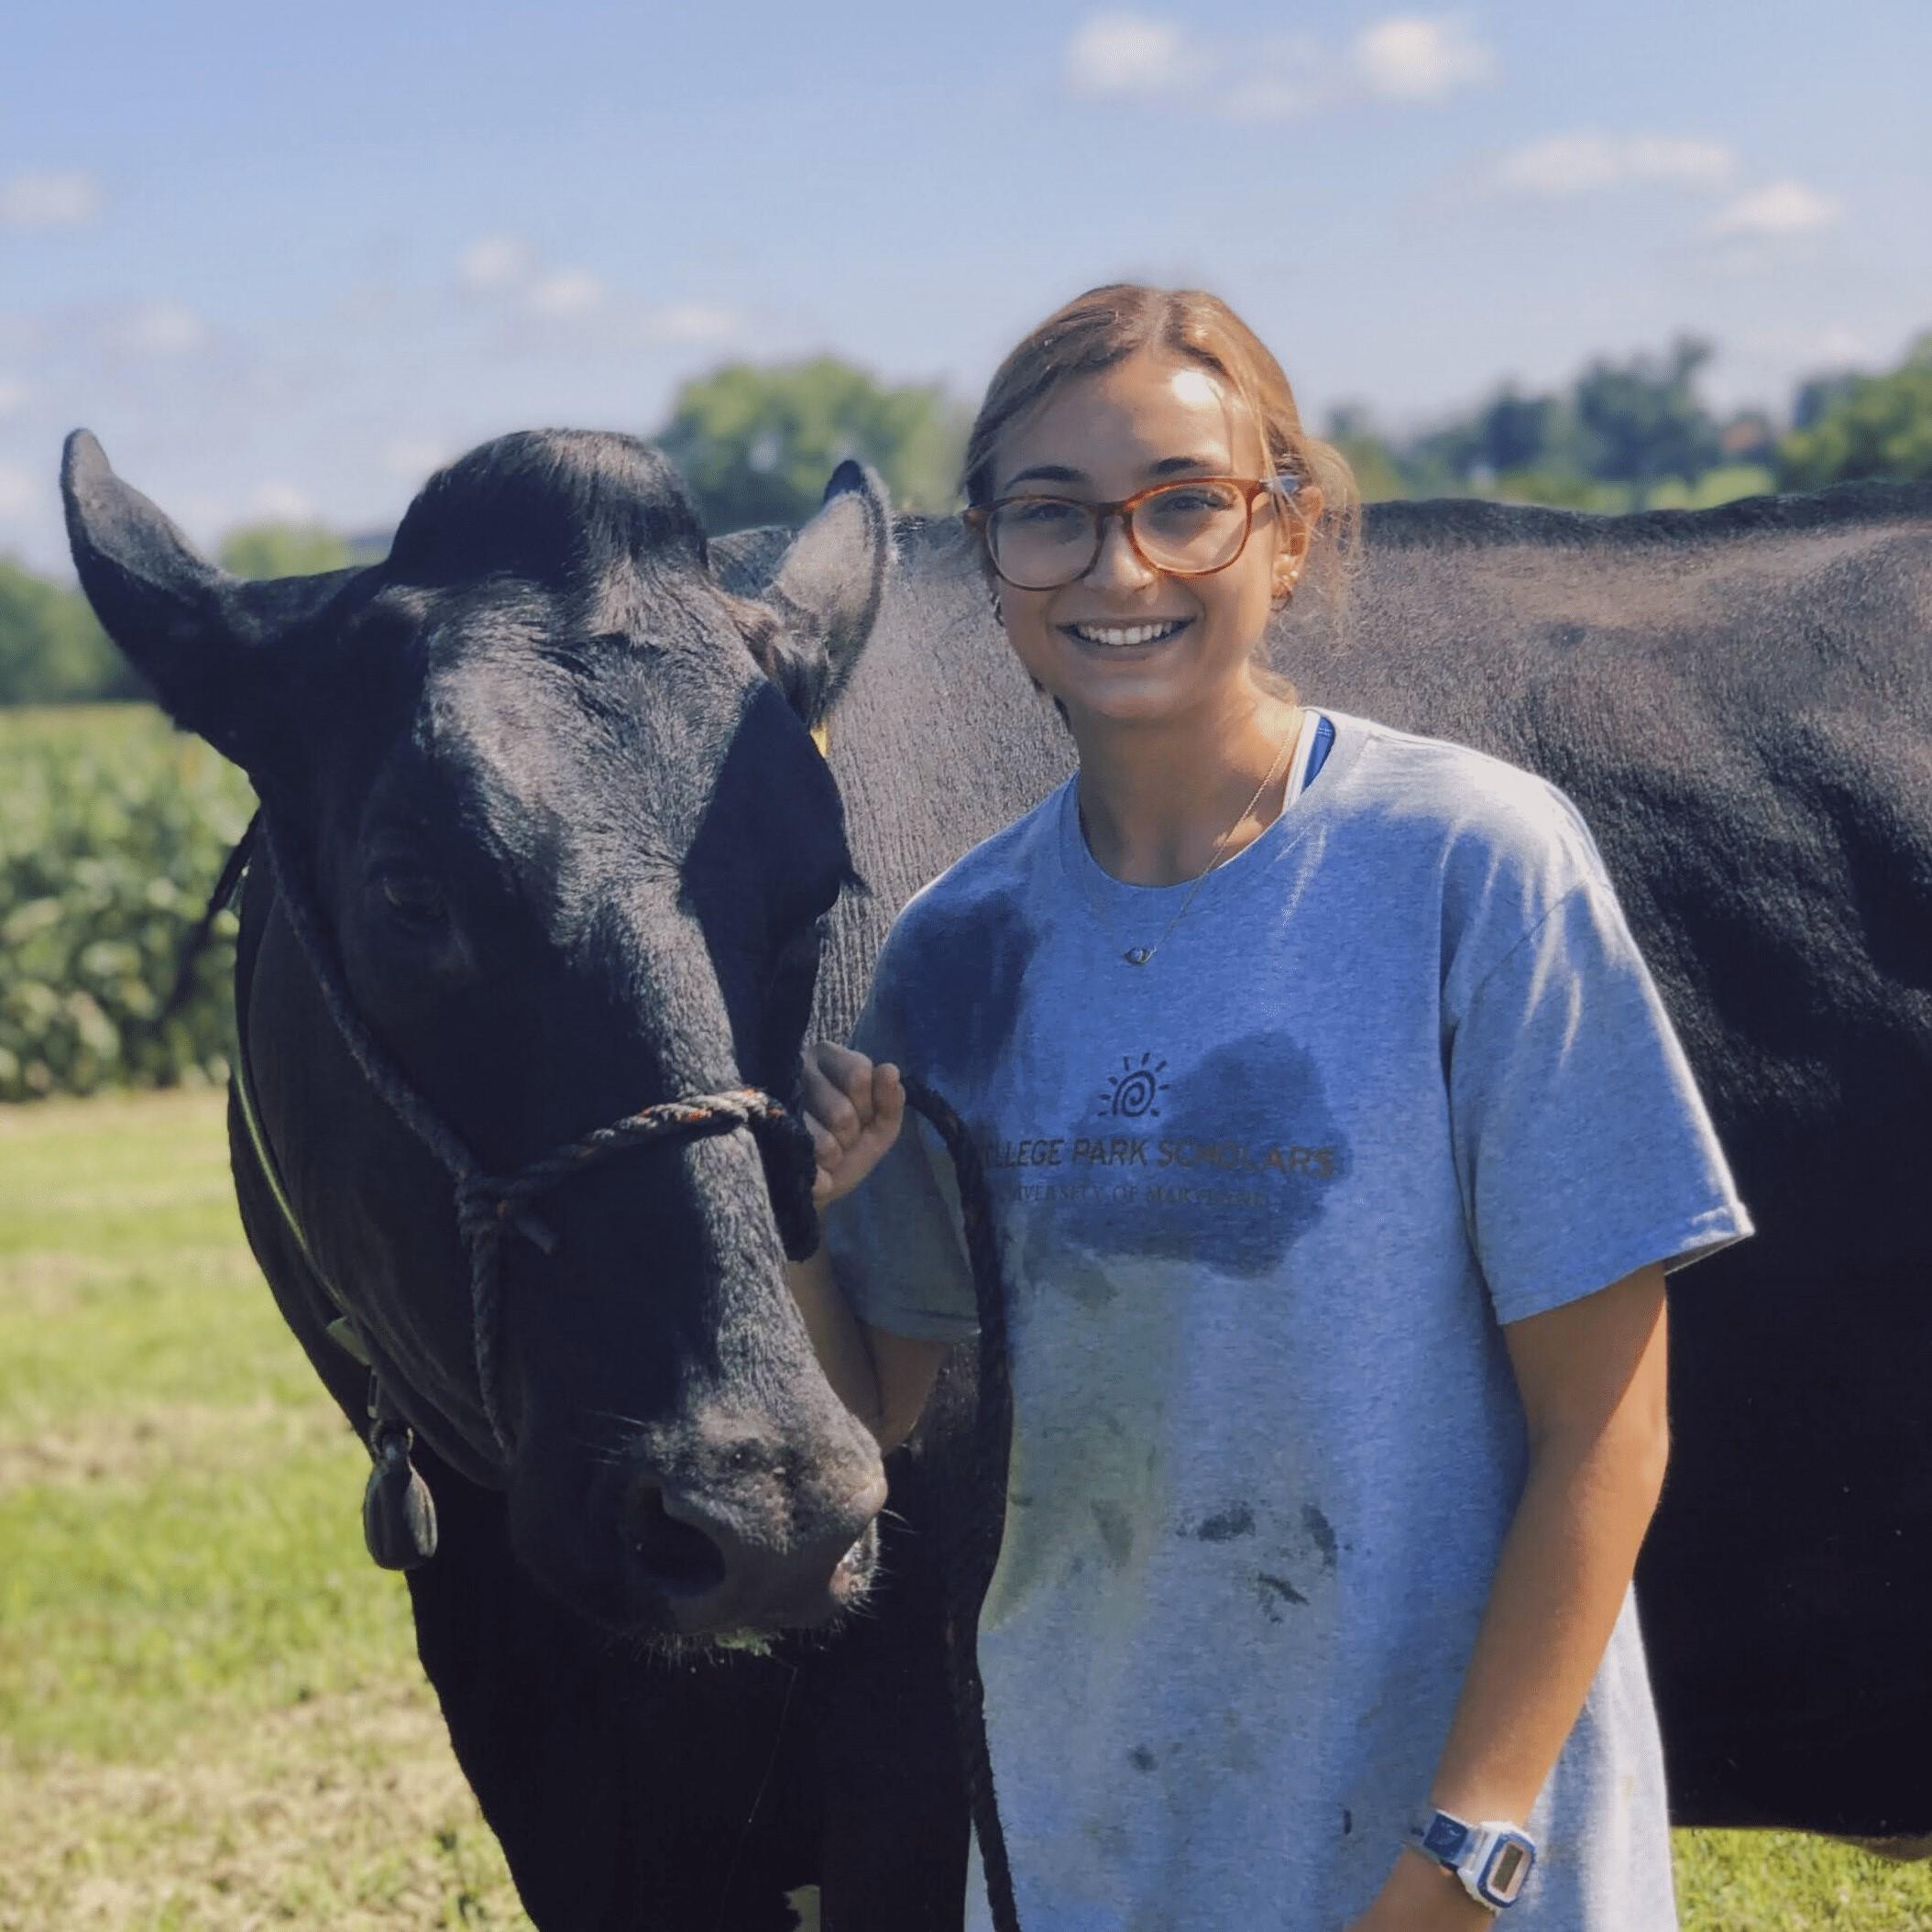 Shannen is smiling and posing next to a black angus cow